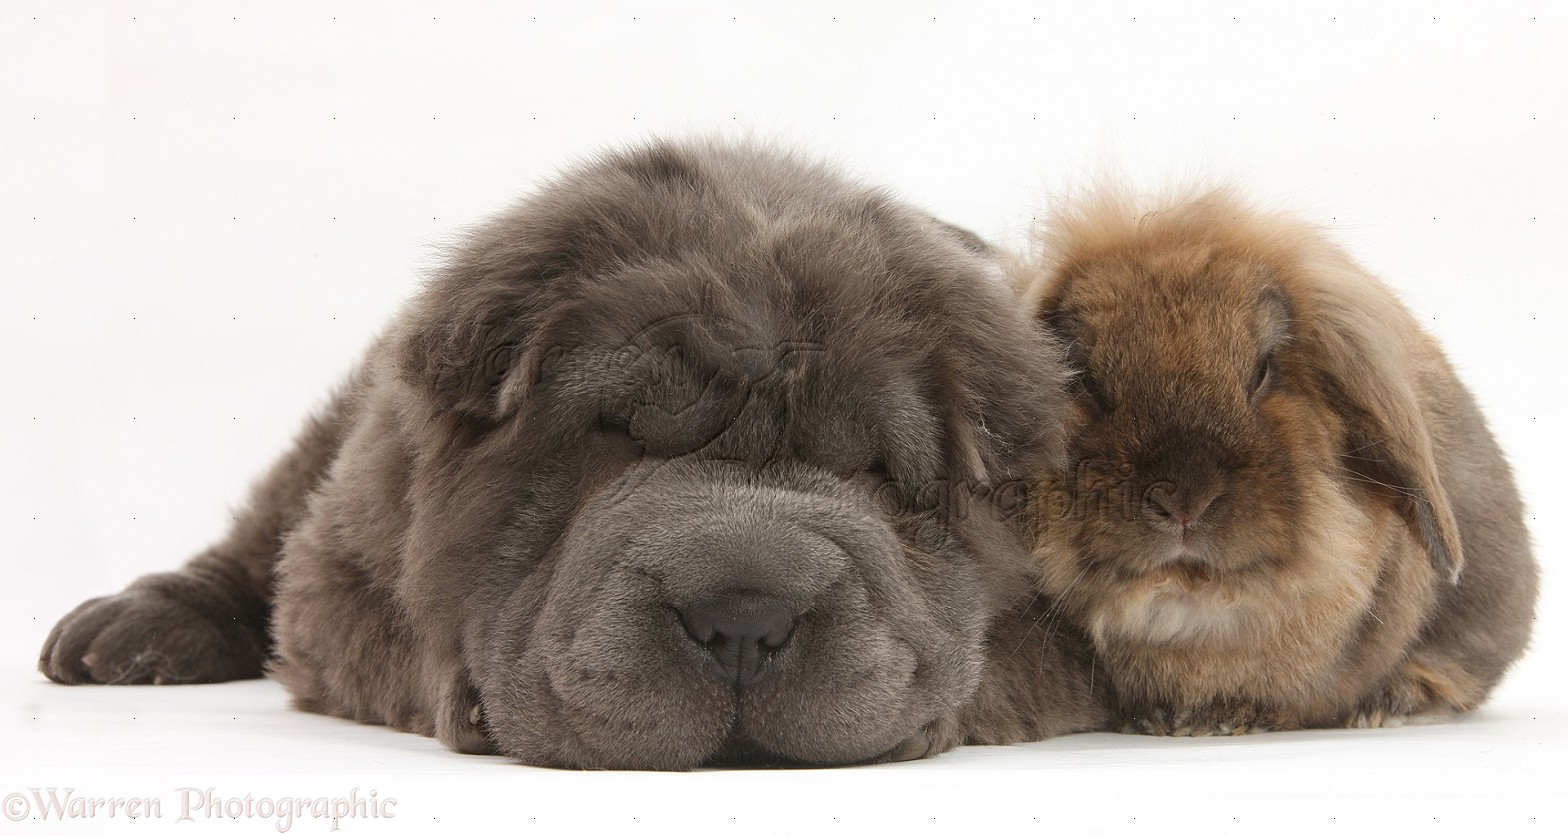  - 34283-Blue-Bearcoat-Shar-Pei-pup-and-rabbit-white-background